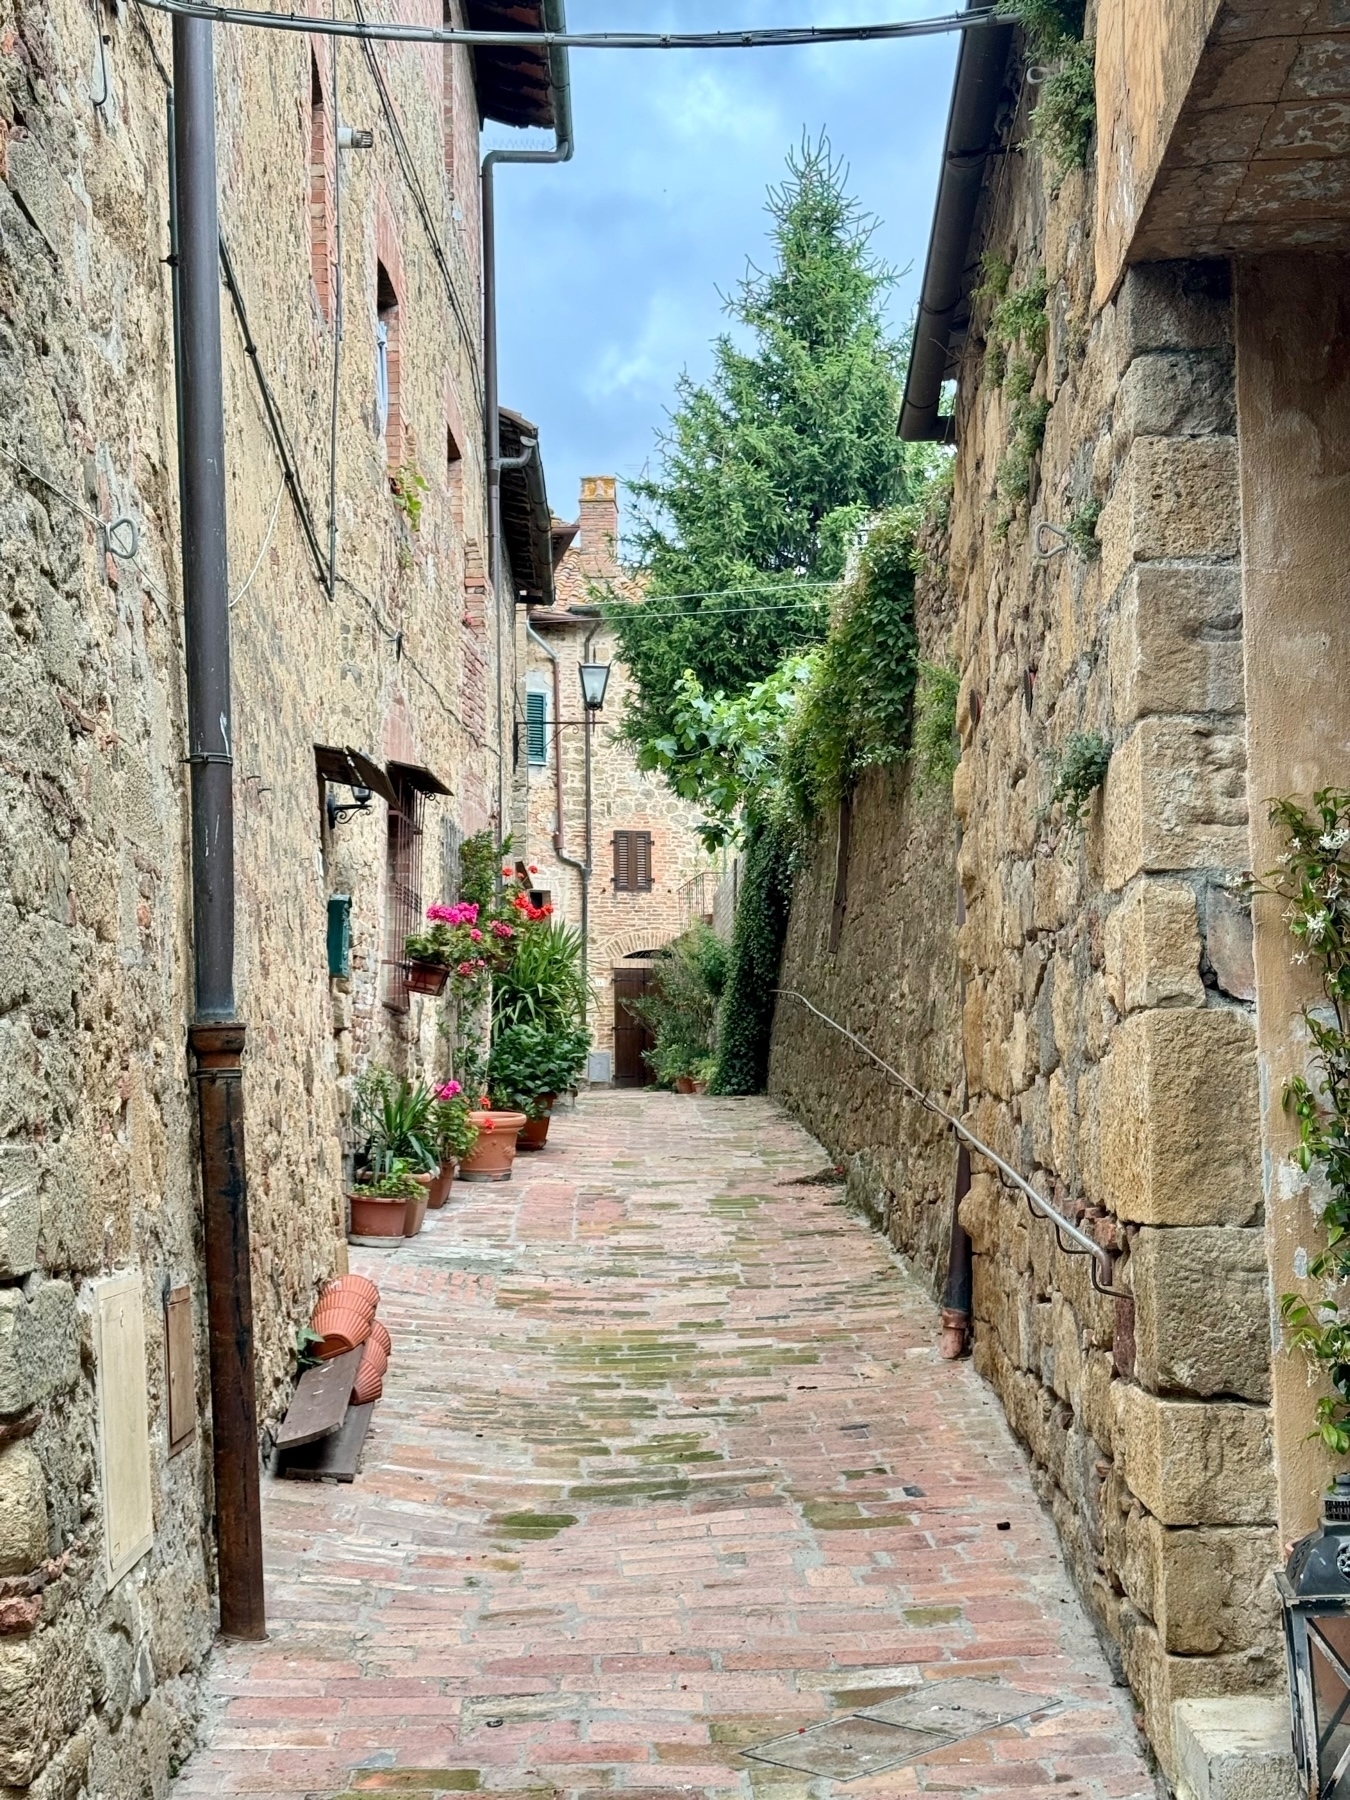 A narrow cobblestone alleyway in an old town, lined with rustic stone buildings. Flower pots with colorful blooms decorate the path. Greenery, including potted plants and a tree, adds to the charm. An overcast sky is visible above. 